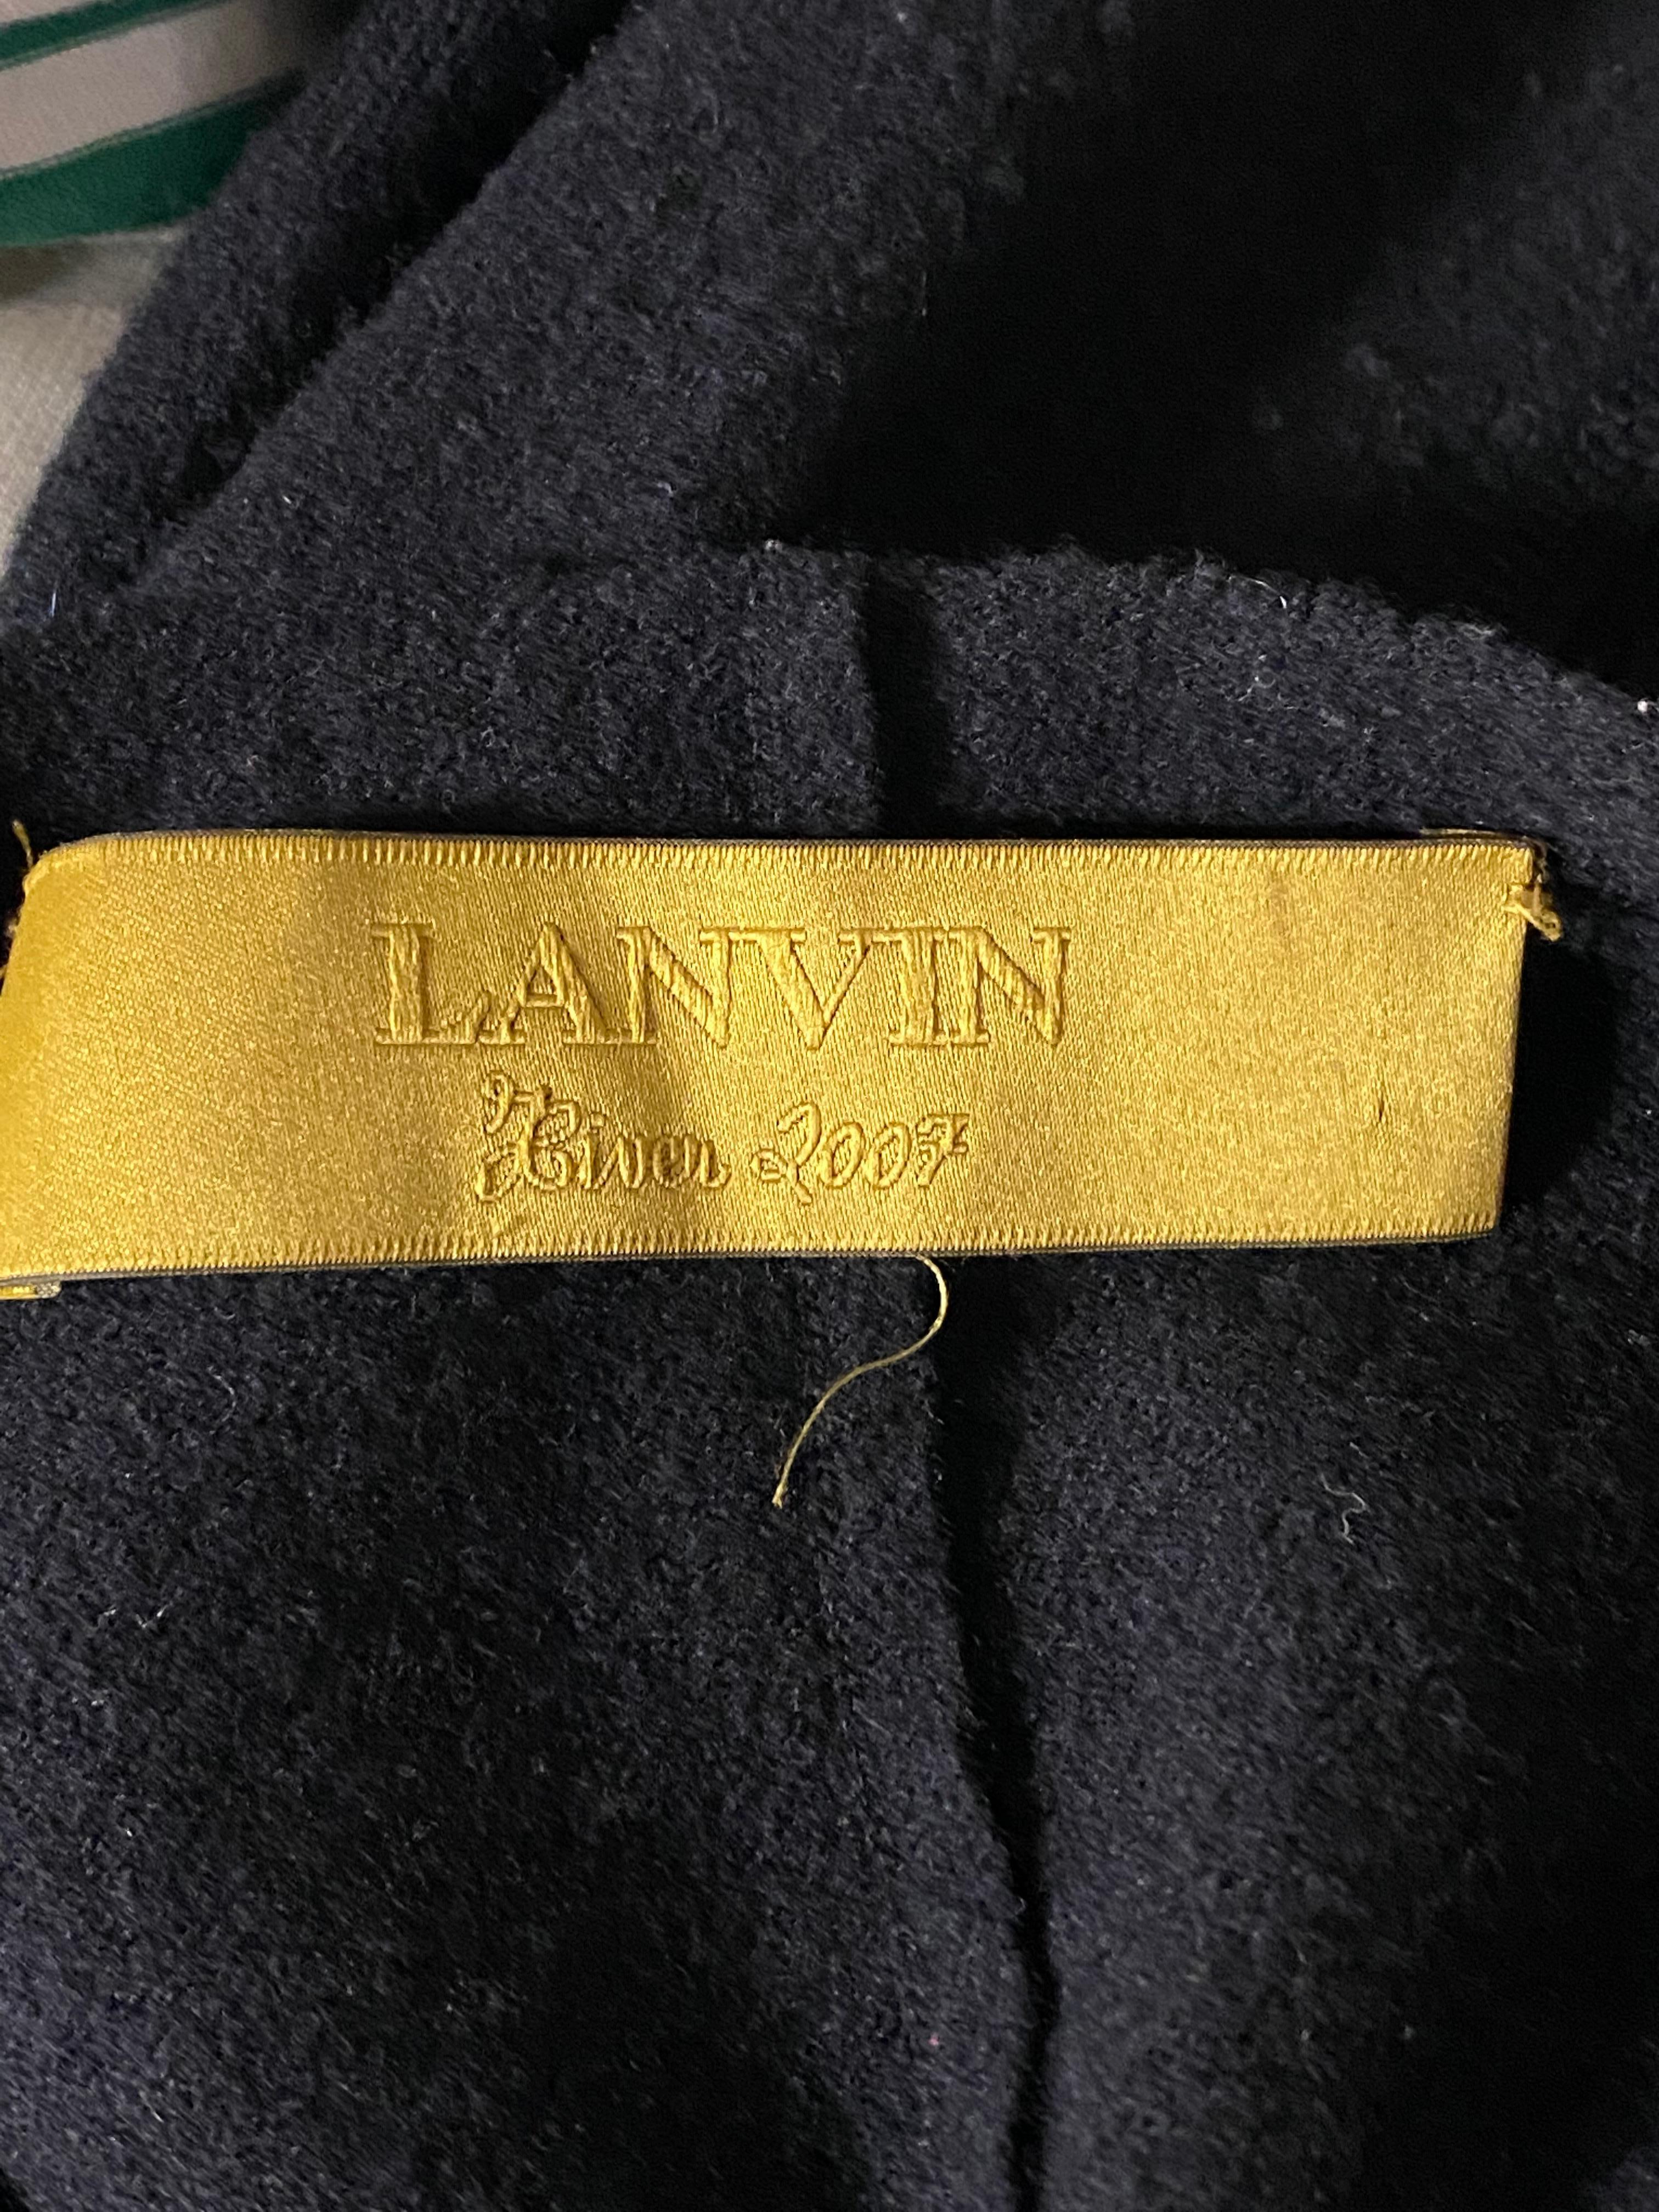 2007 Lanvin Black Wool Cardigan, Size Small For Sale 4